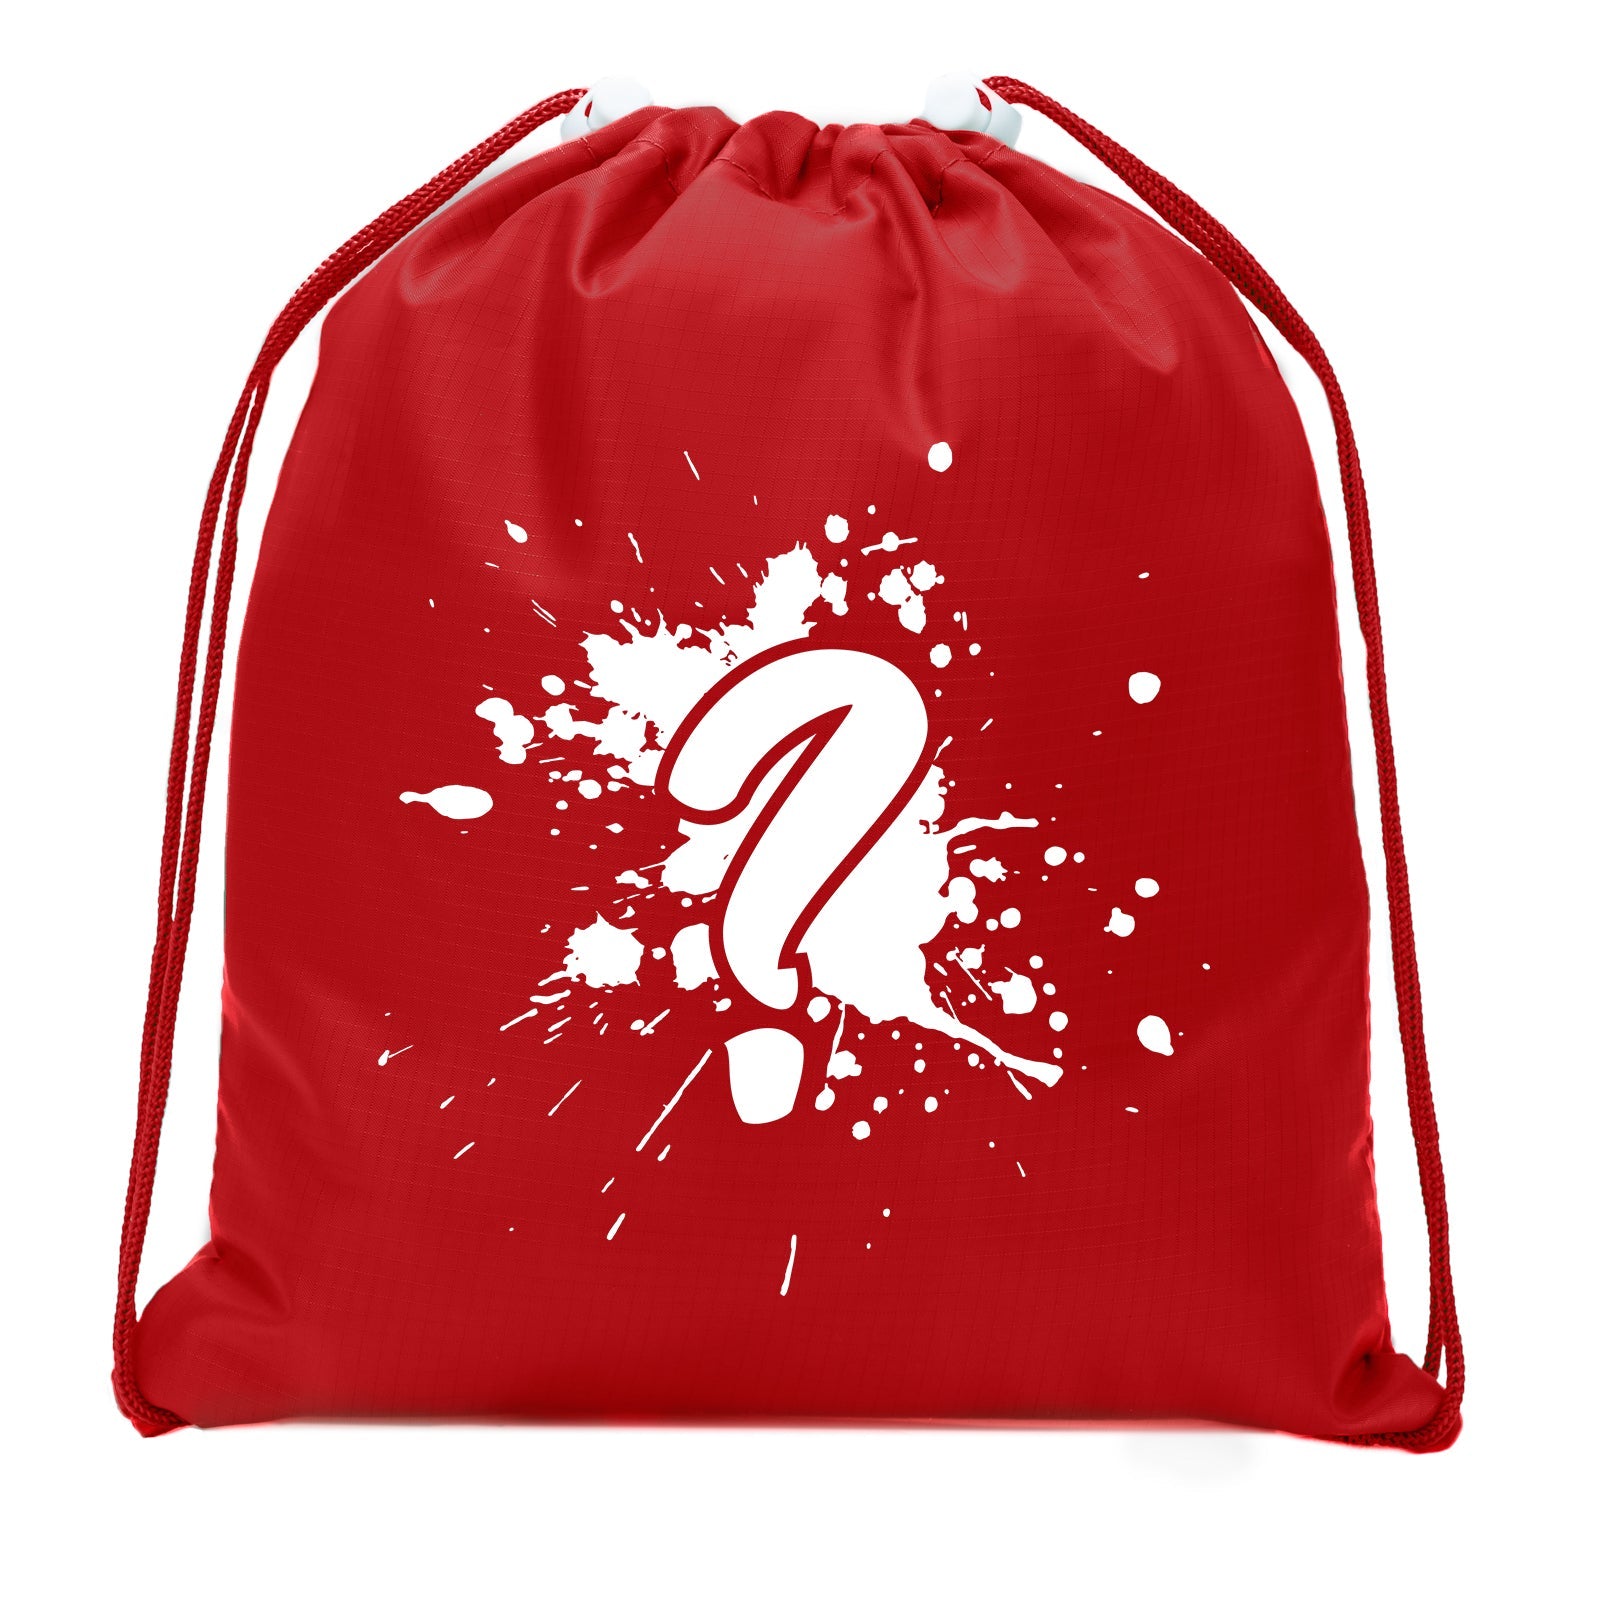 Spray Paint Question Mark Polyester Drawstring Bag